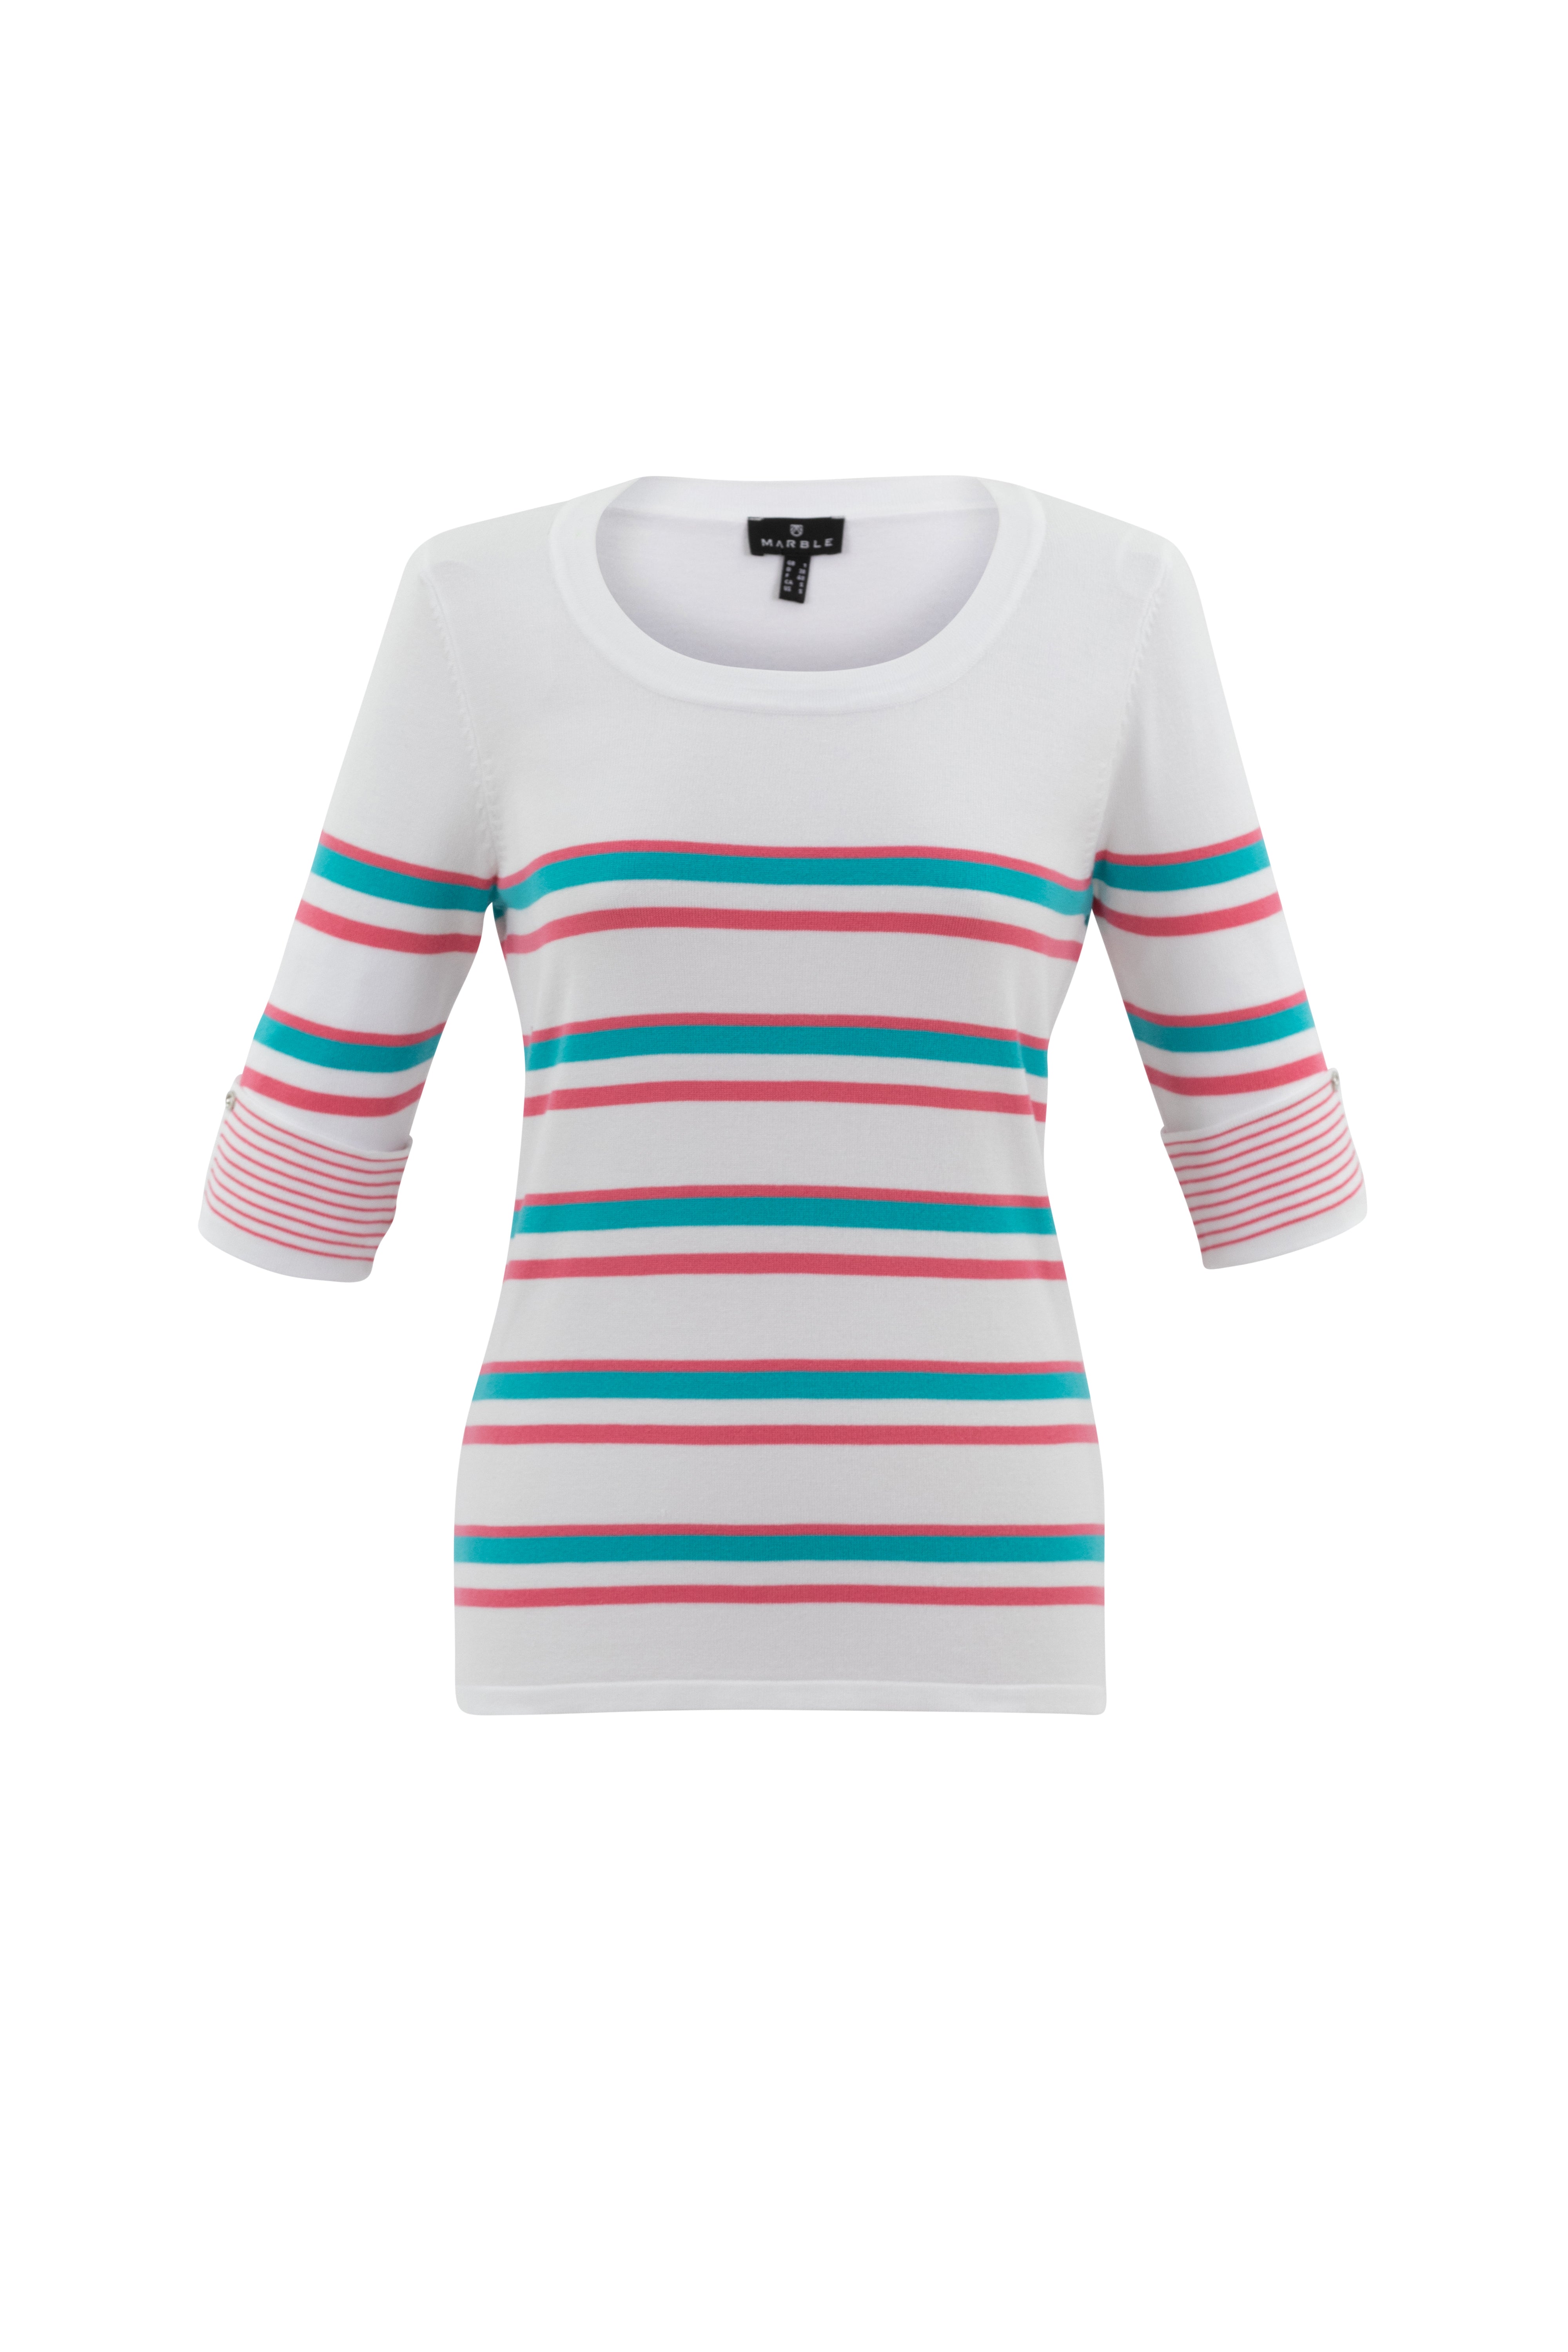 Super soft viscose mix classic fit round neck stripe sweater in coral, white and turq with contrast turn back striped cuff with split detail and button attachment